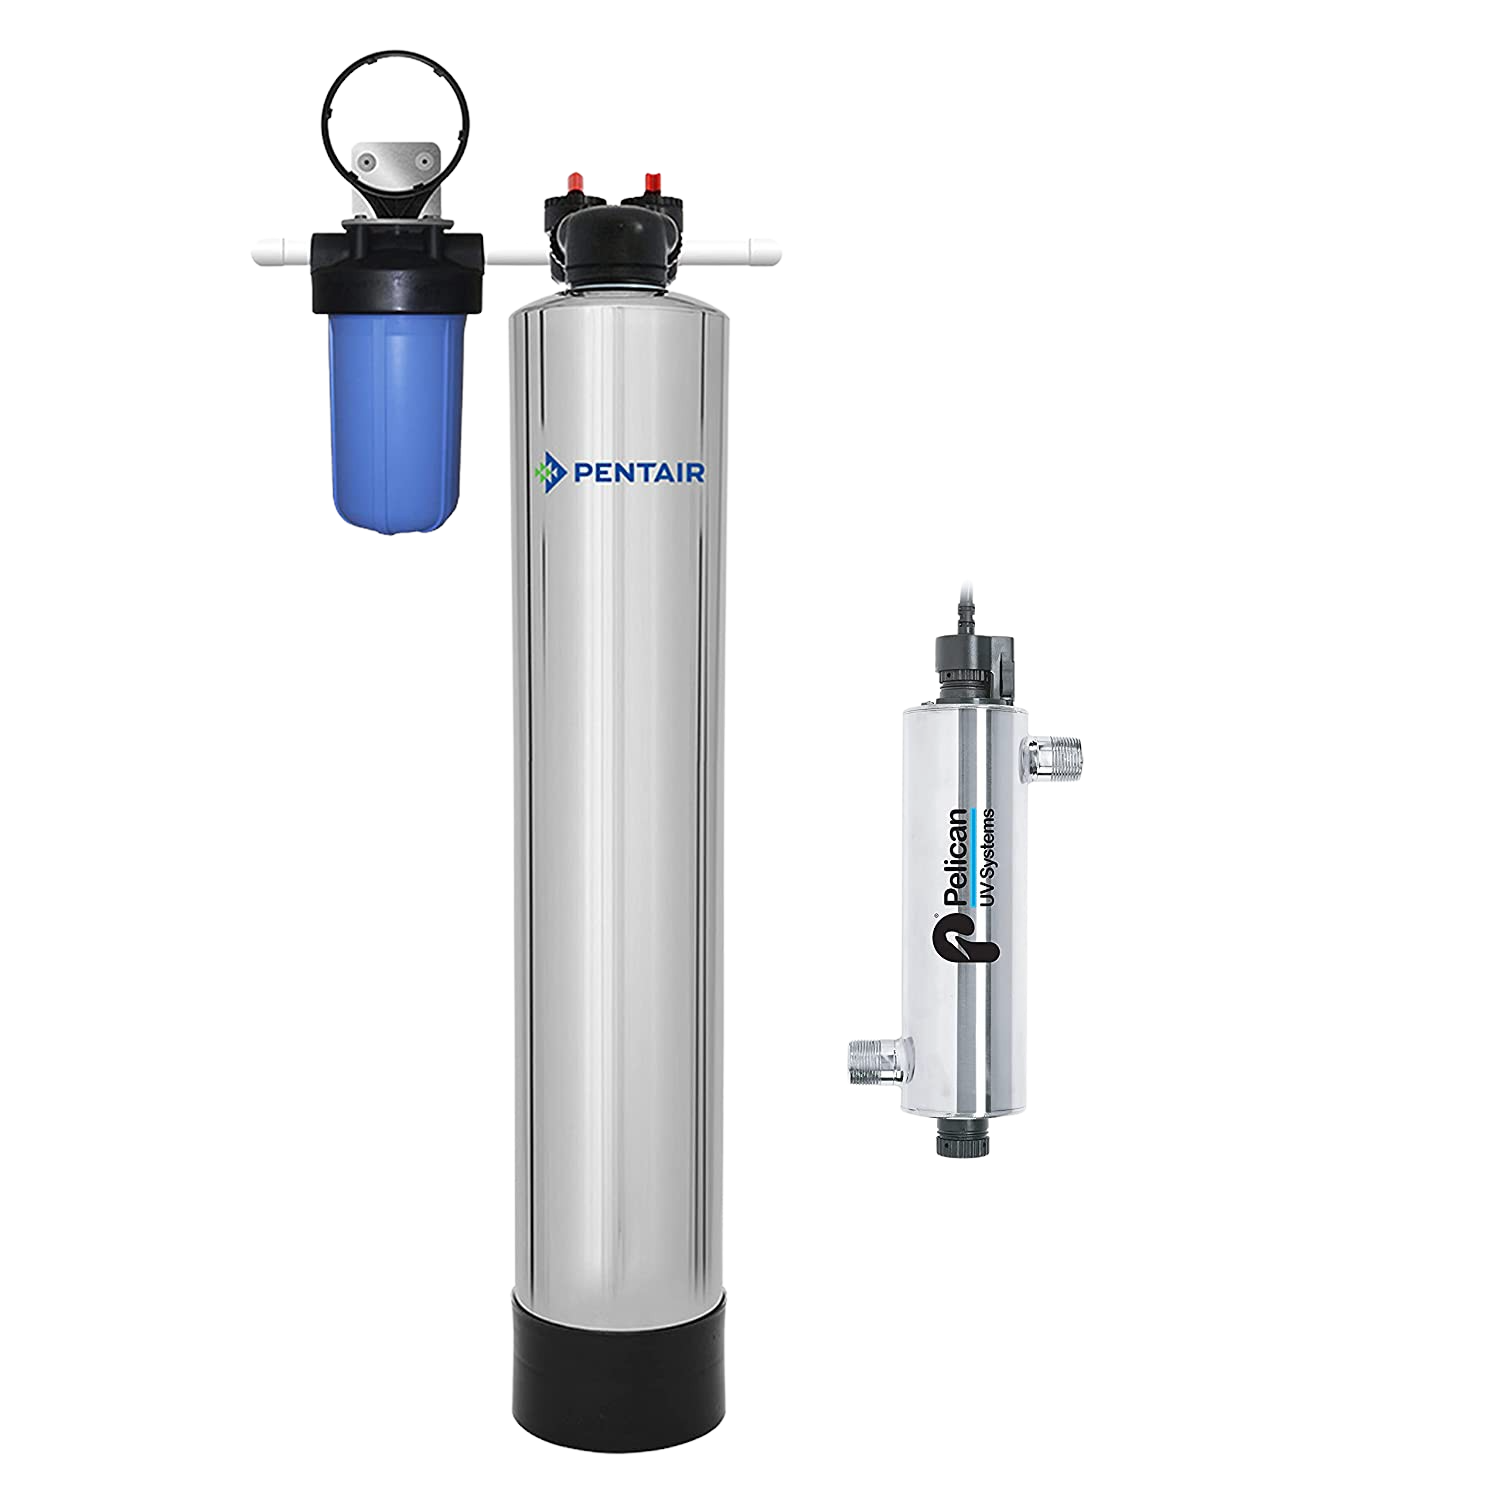 Pentair, Pentair Pelican PC600-PUV-7 Whole House Water Filter New